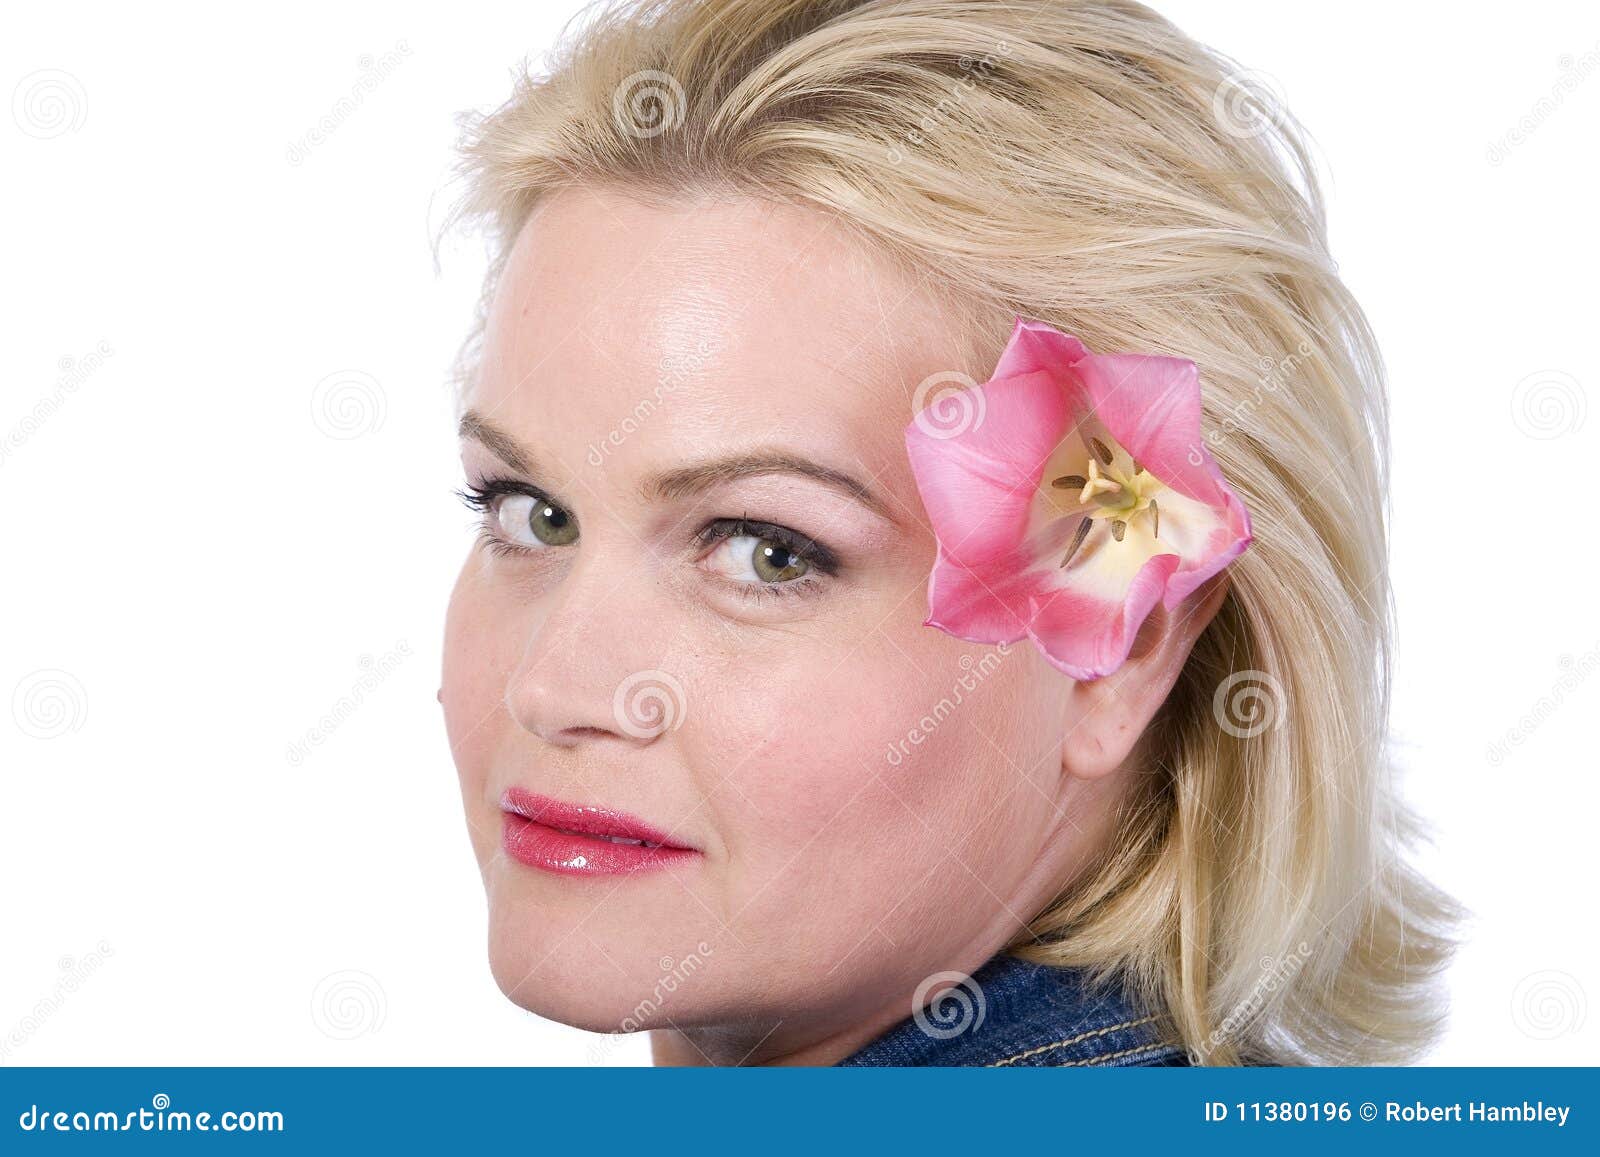 Blonde woman with flowers in her hair - wide 3